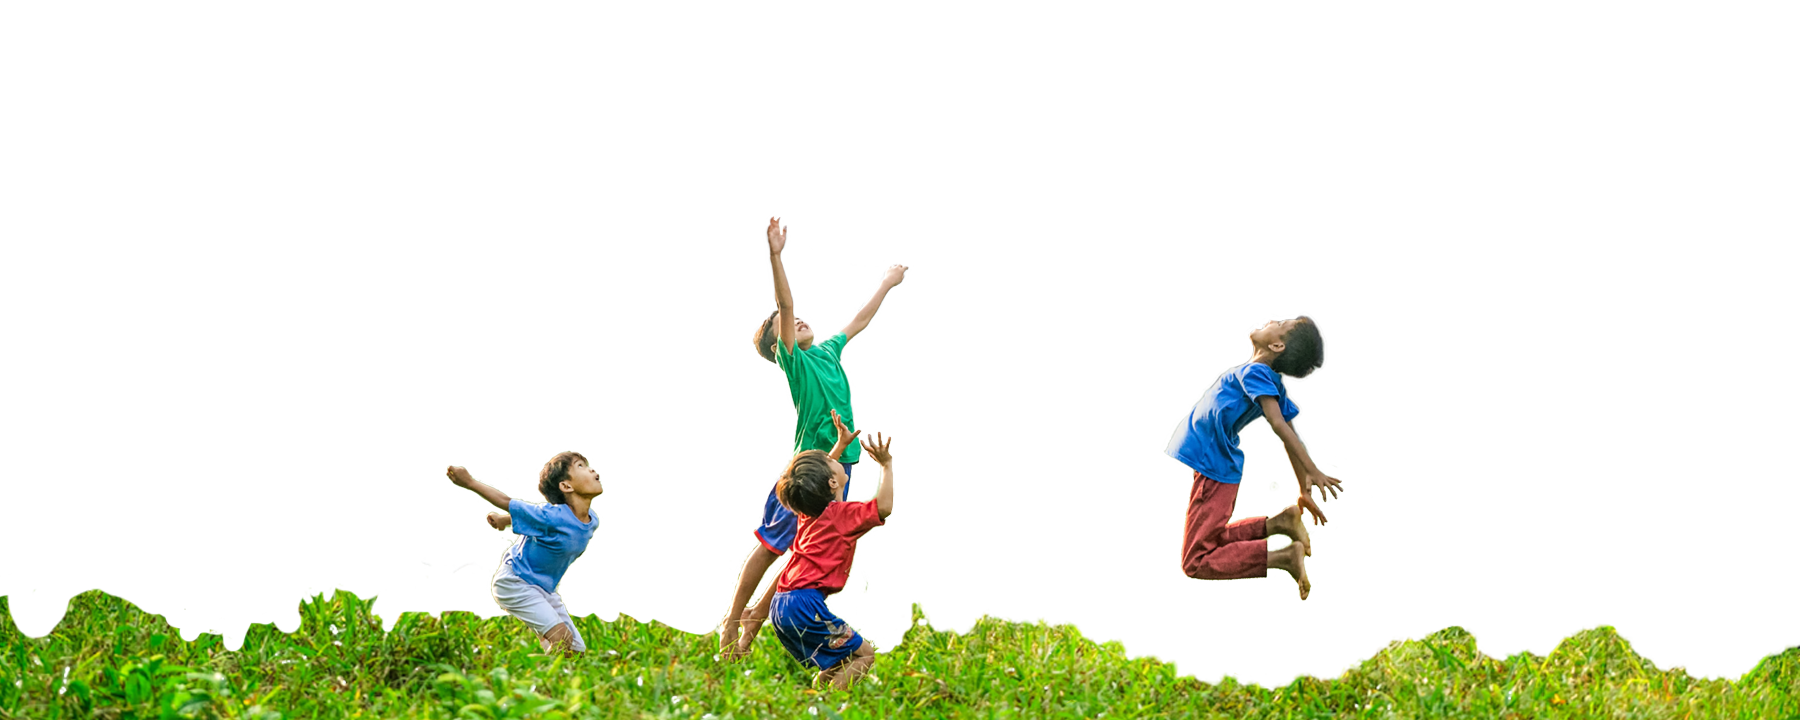 Four Boys Jumping in Grass at Dream Big Summer Day Camp | Hilltop Denver and Greenwood Village